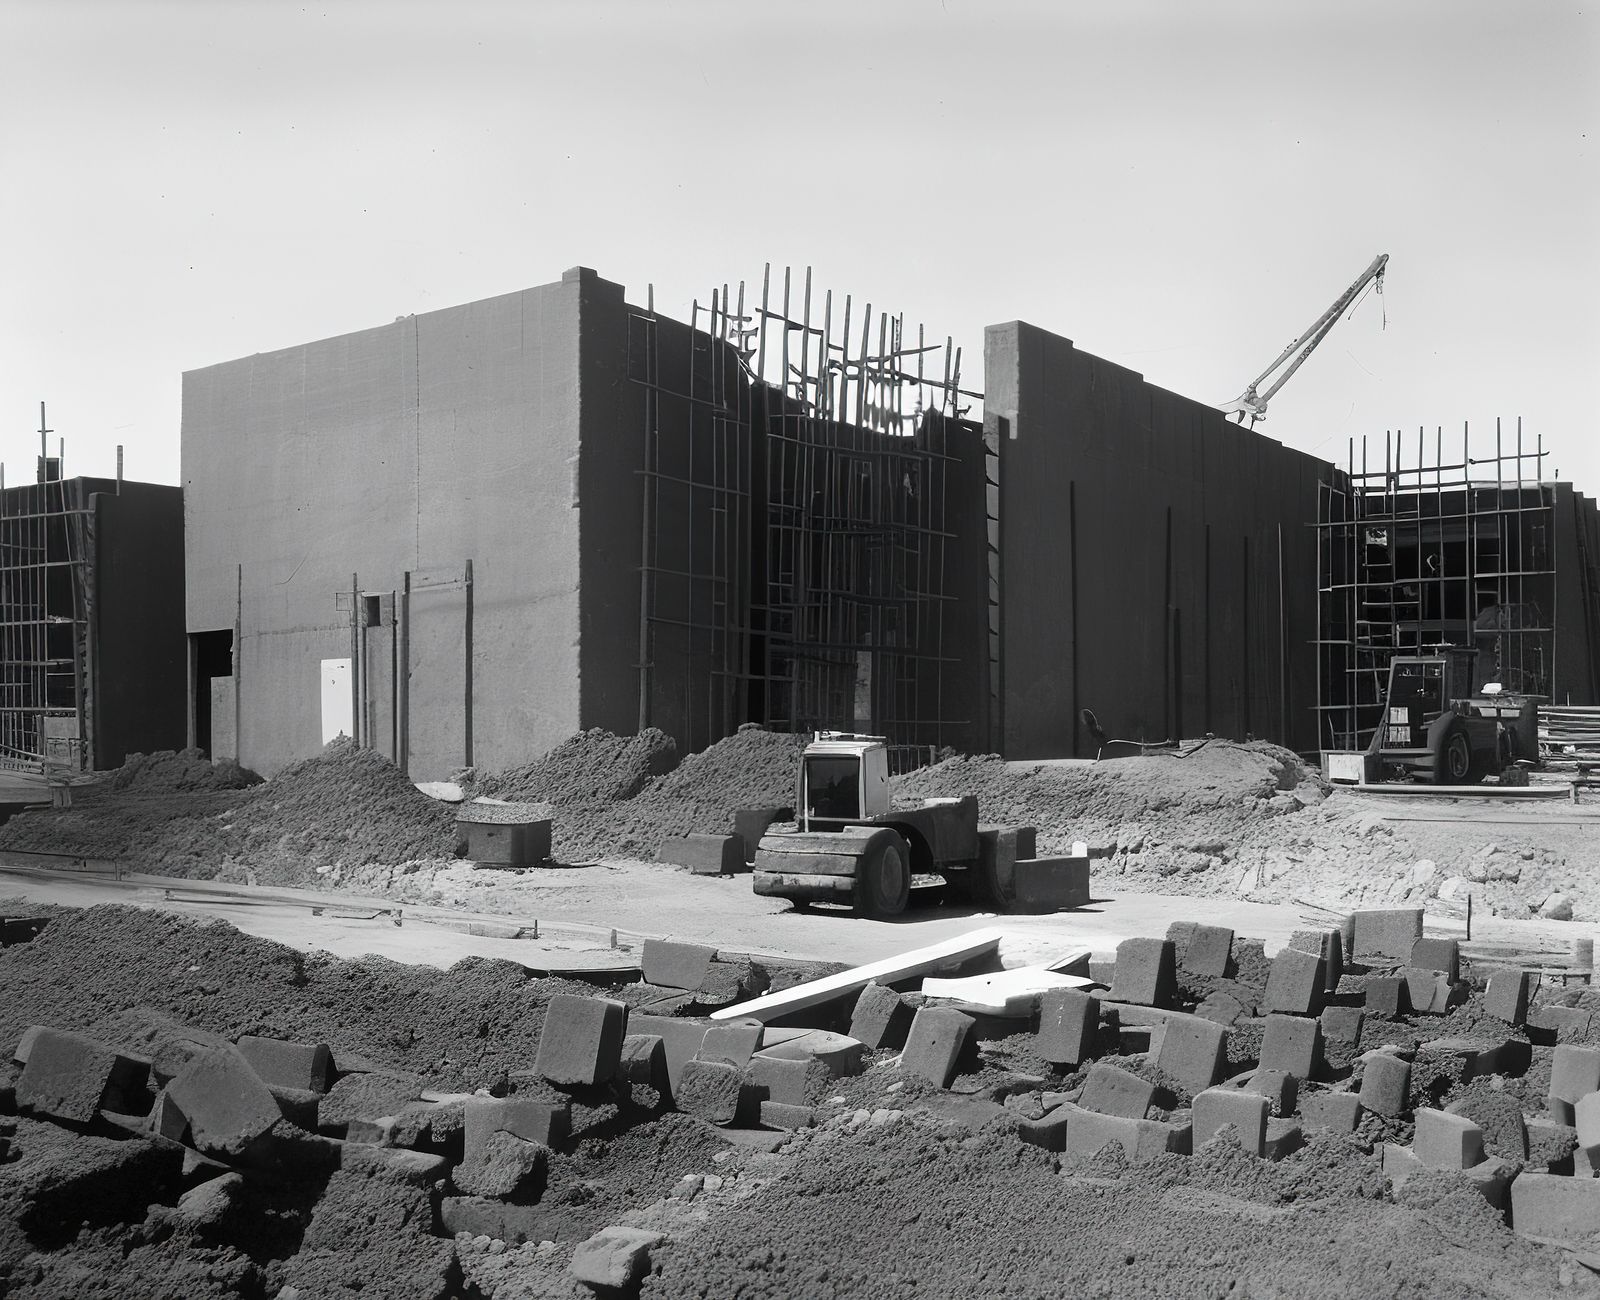 © Craig Ames - Foundation Construction, Many Warehouses, 2892 Kelvin, Irvine. (Possibly After Lewis Baltz )